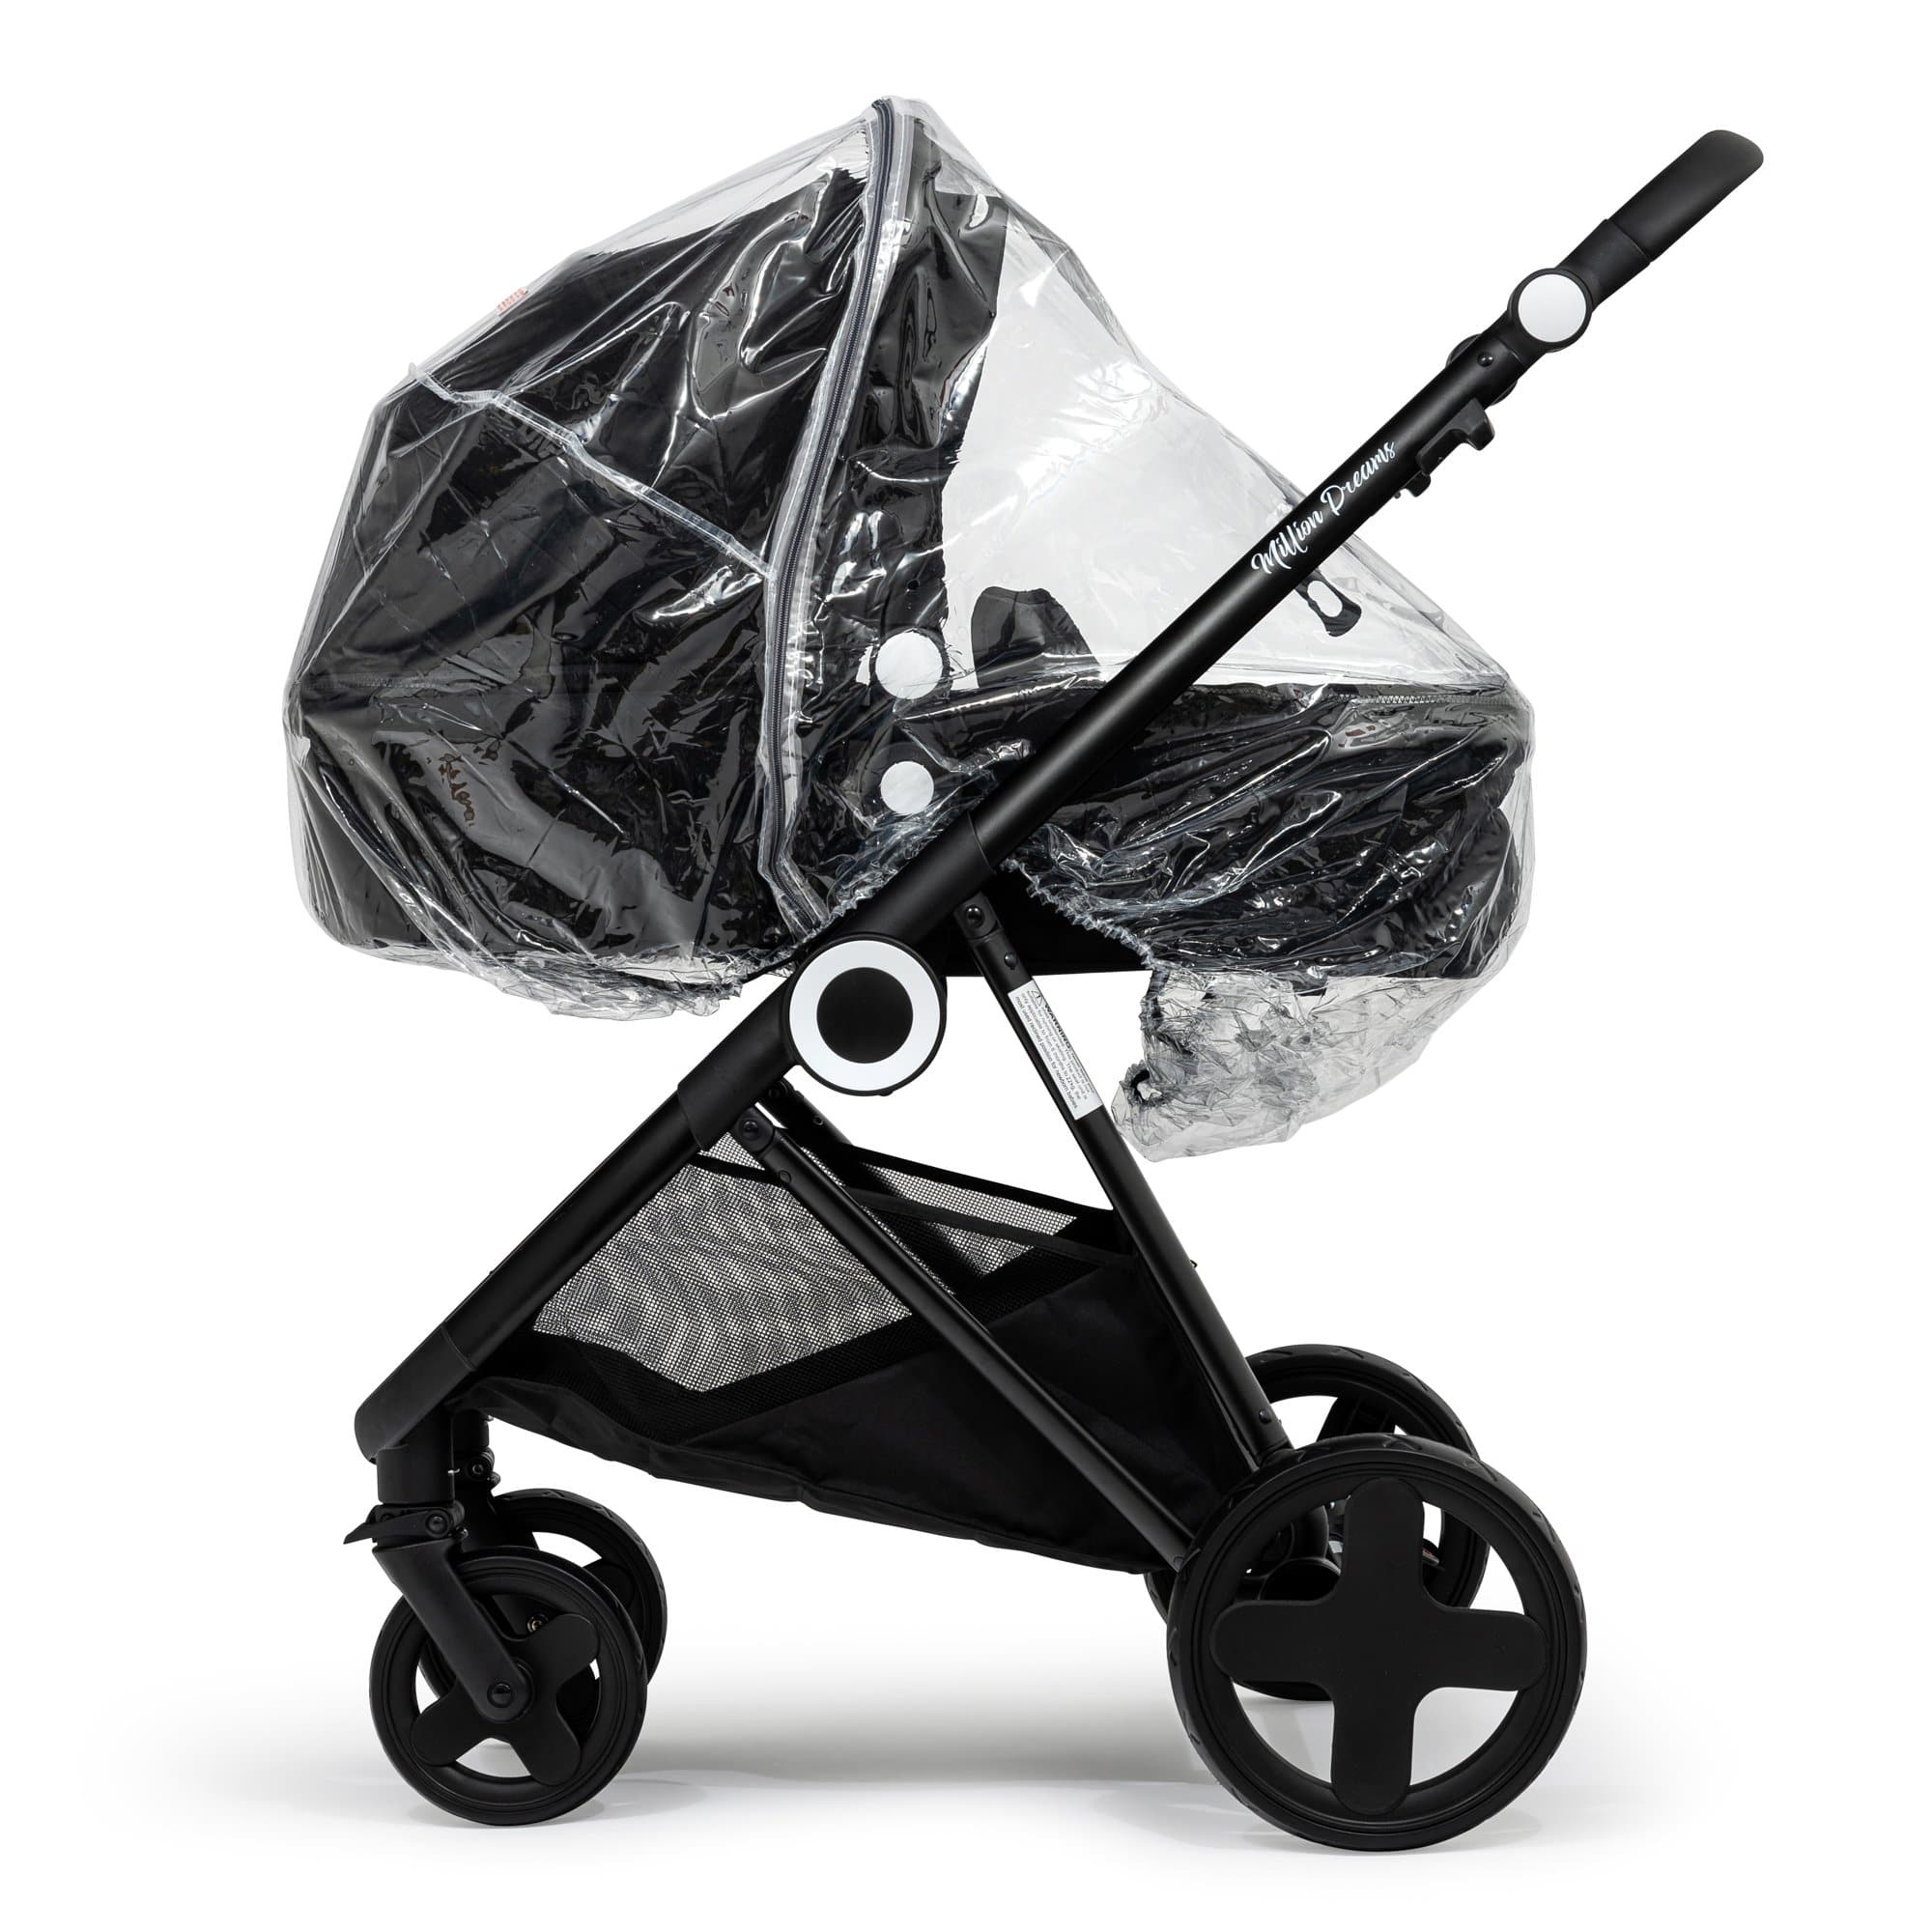 Universal Rain Cover For 2 in 1 Prams - Fits All Models - For Your Little One